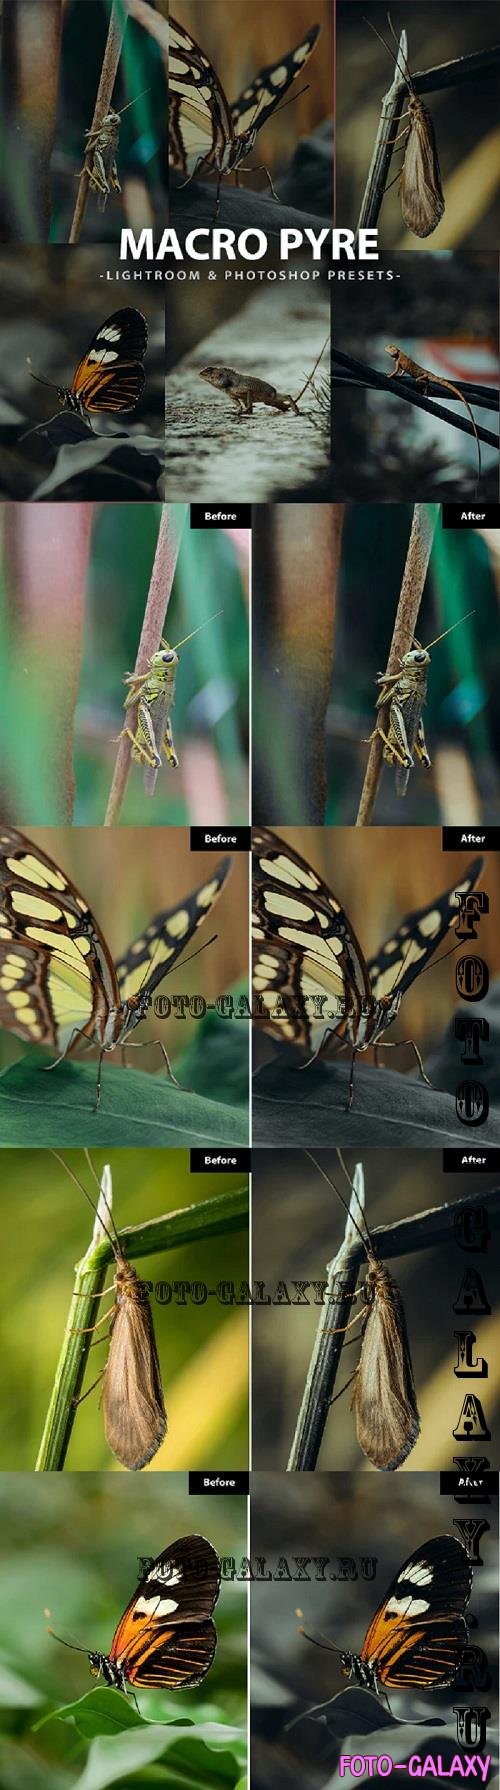 6 Macro Pyre Lightroom and Photoshop Presets - 46543010